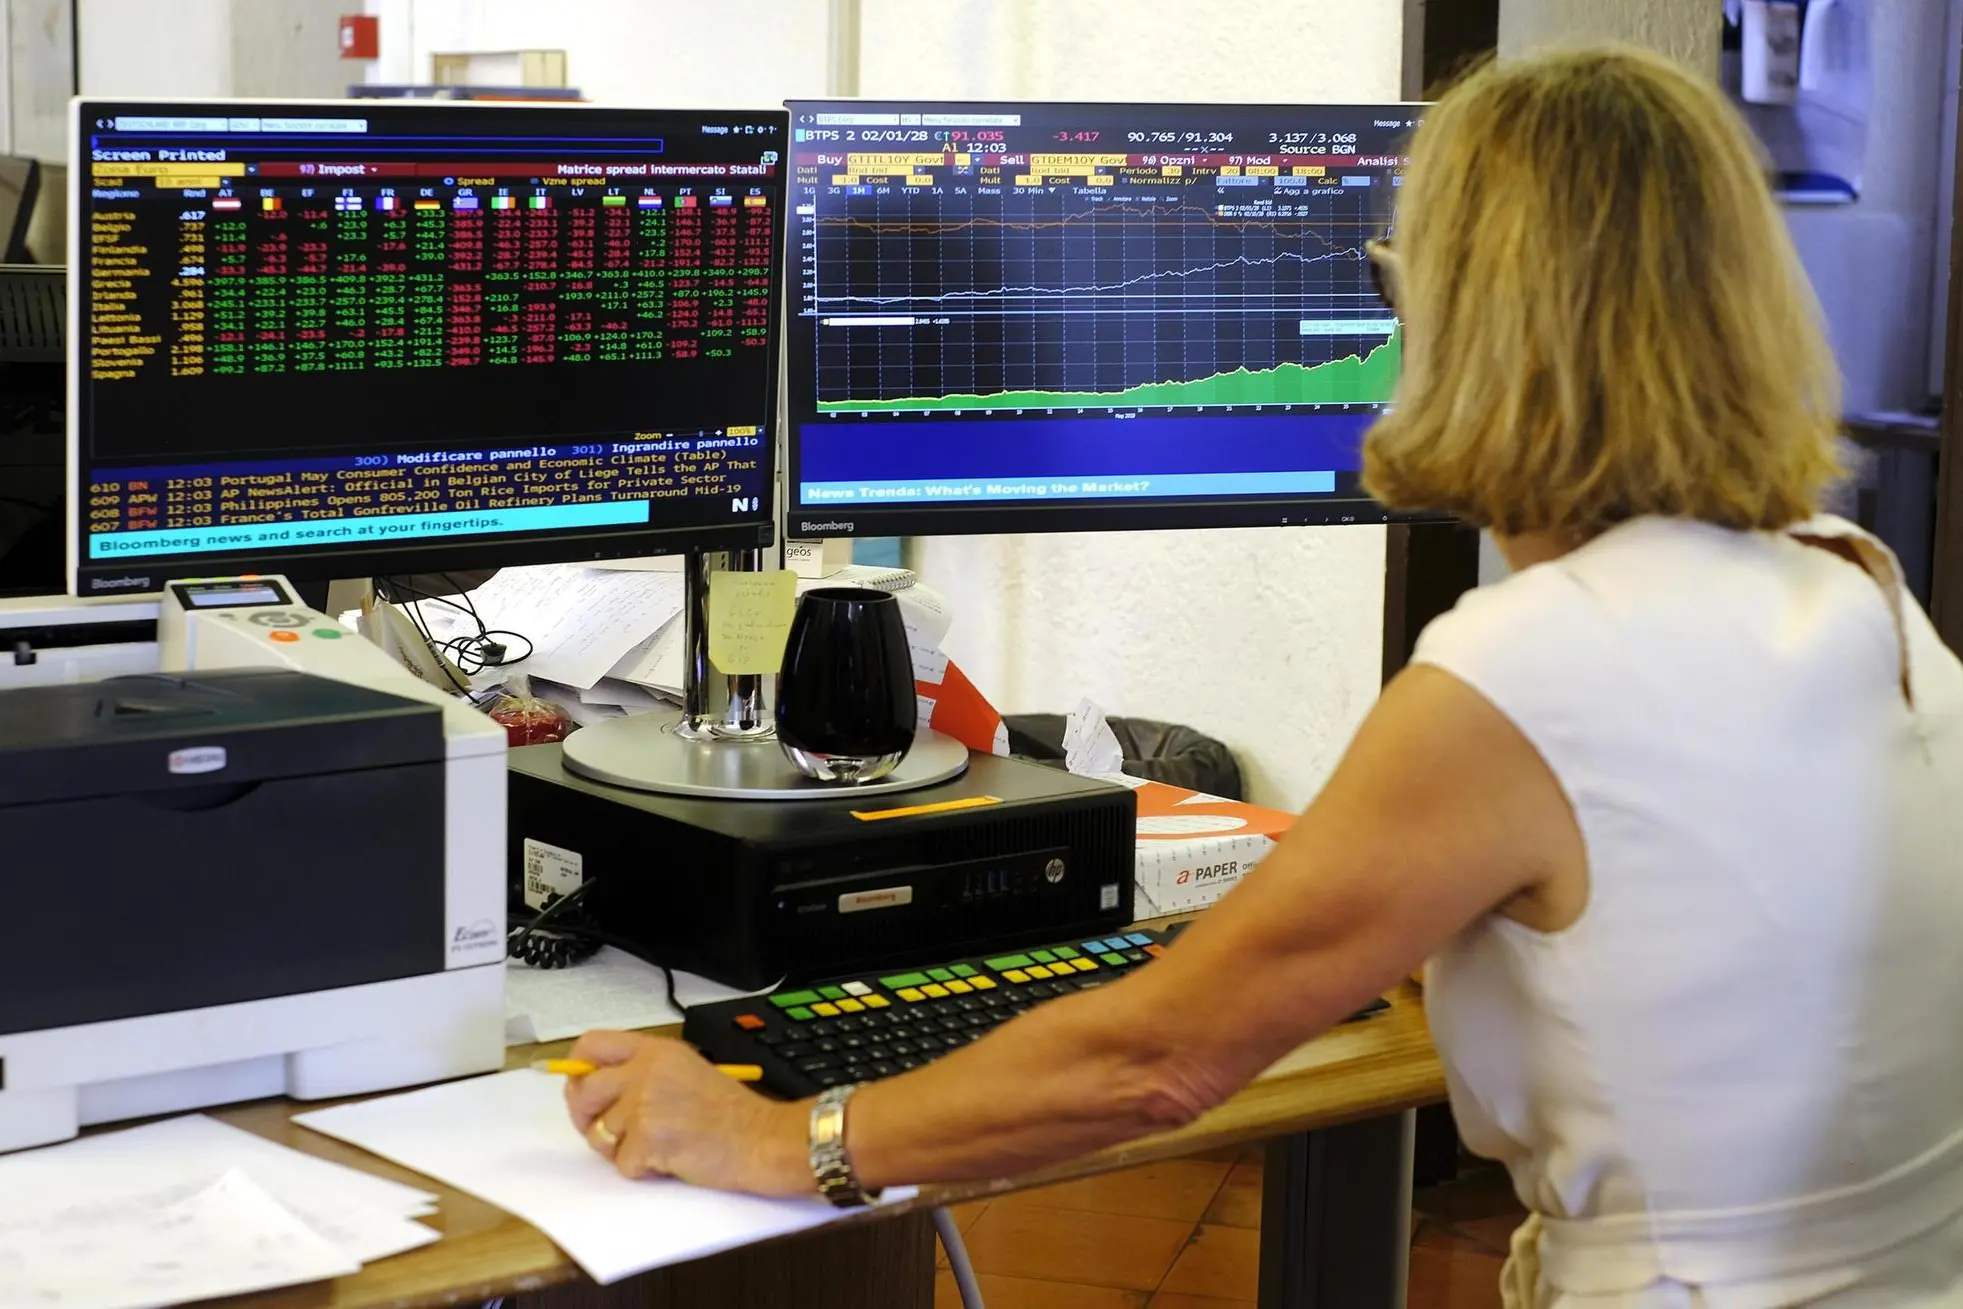 A financial journalist checks the course of the "spread" caused by the nervousness of the markets due to political uncertainty in Rome, Italy, 29 May 2018. The spread between Italy's 10-year BTP bond and the German Bund dropped back to 282 basis points on Tuesday with a yield of 3.1%. The spread had reached 320 points with a yield of 3.4% at one stage earlier on Tuesday. ANSA/LUCIANO DEL CASTILLO